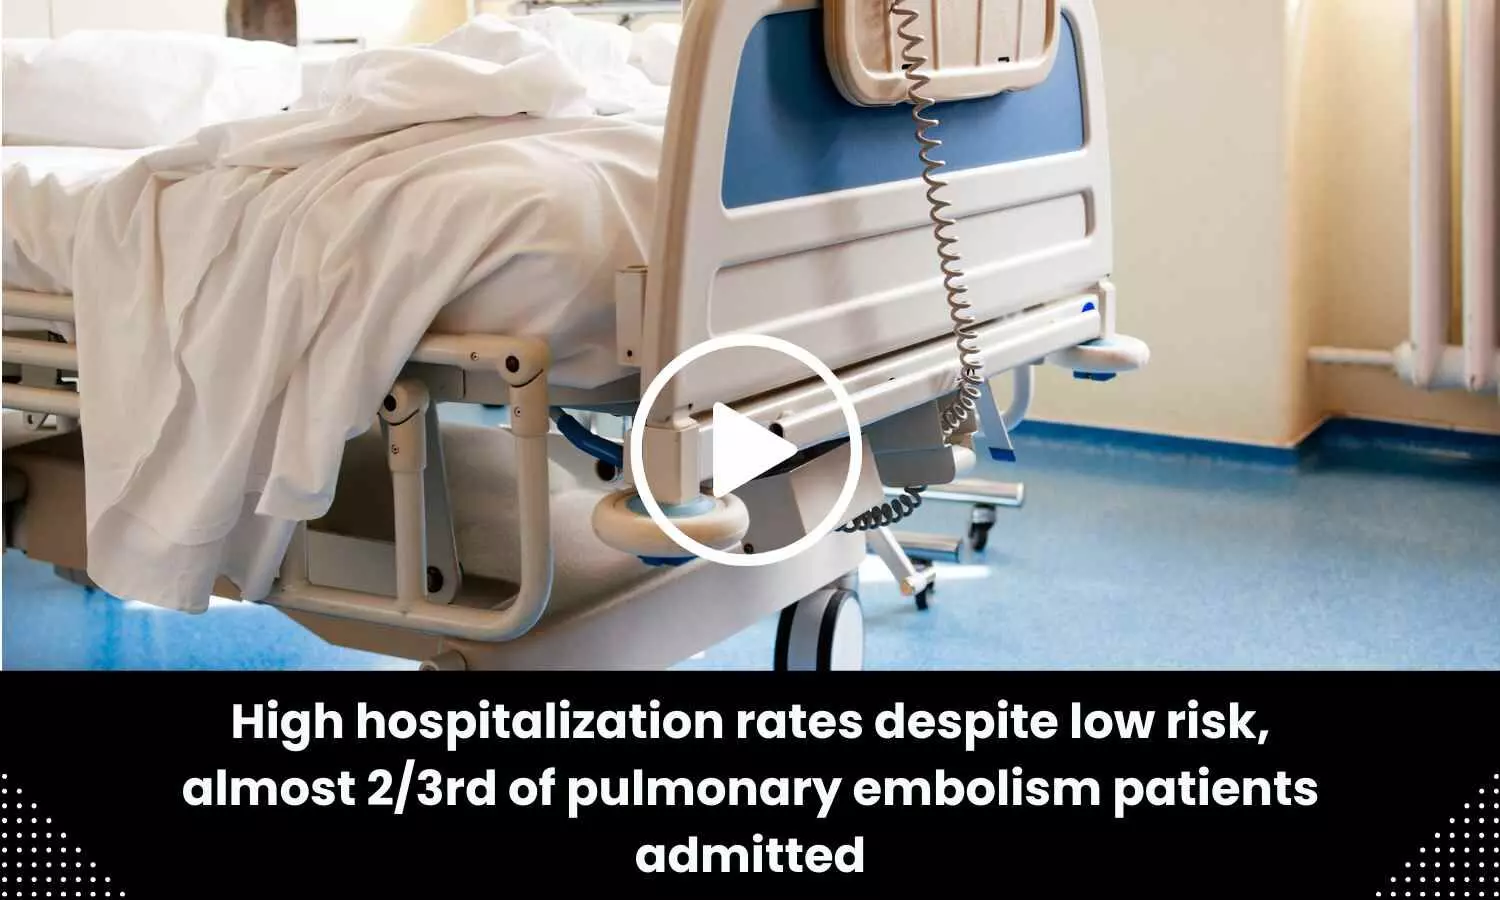 High hospitalization rates despite low risk, almost 2/3rd of pulmonary embolism patients admitted